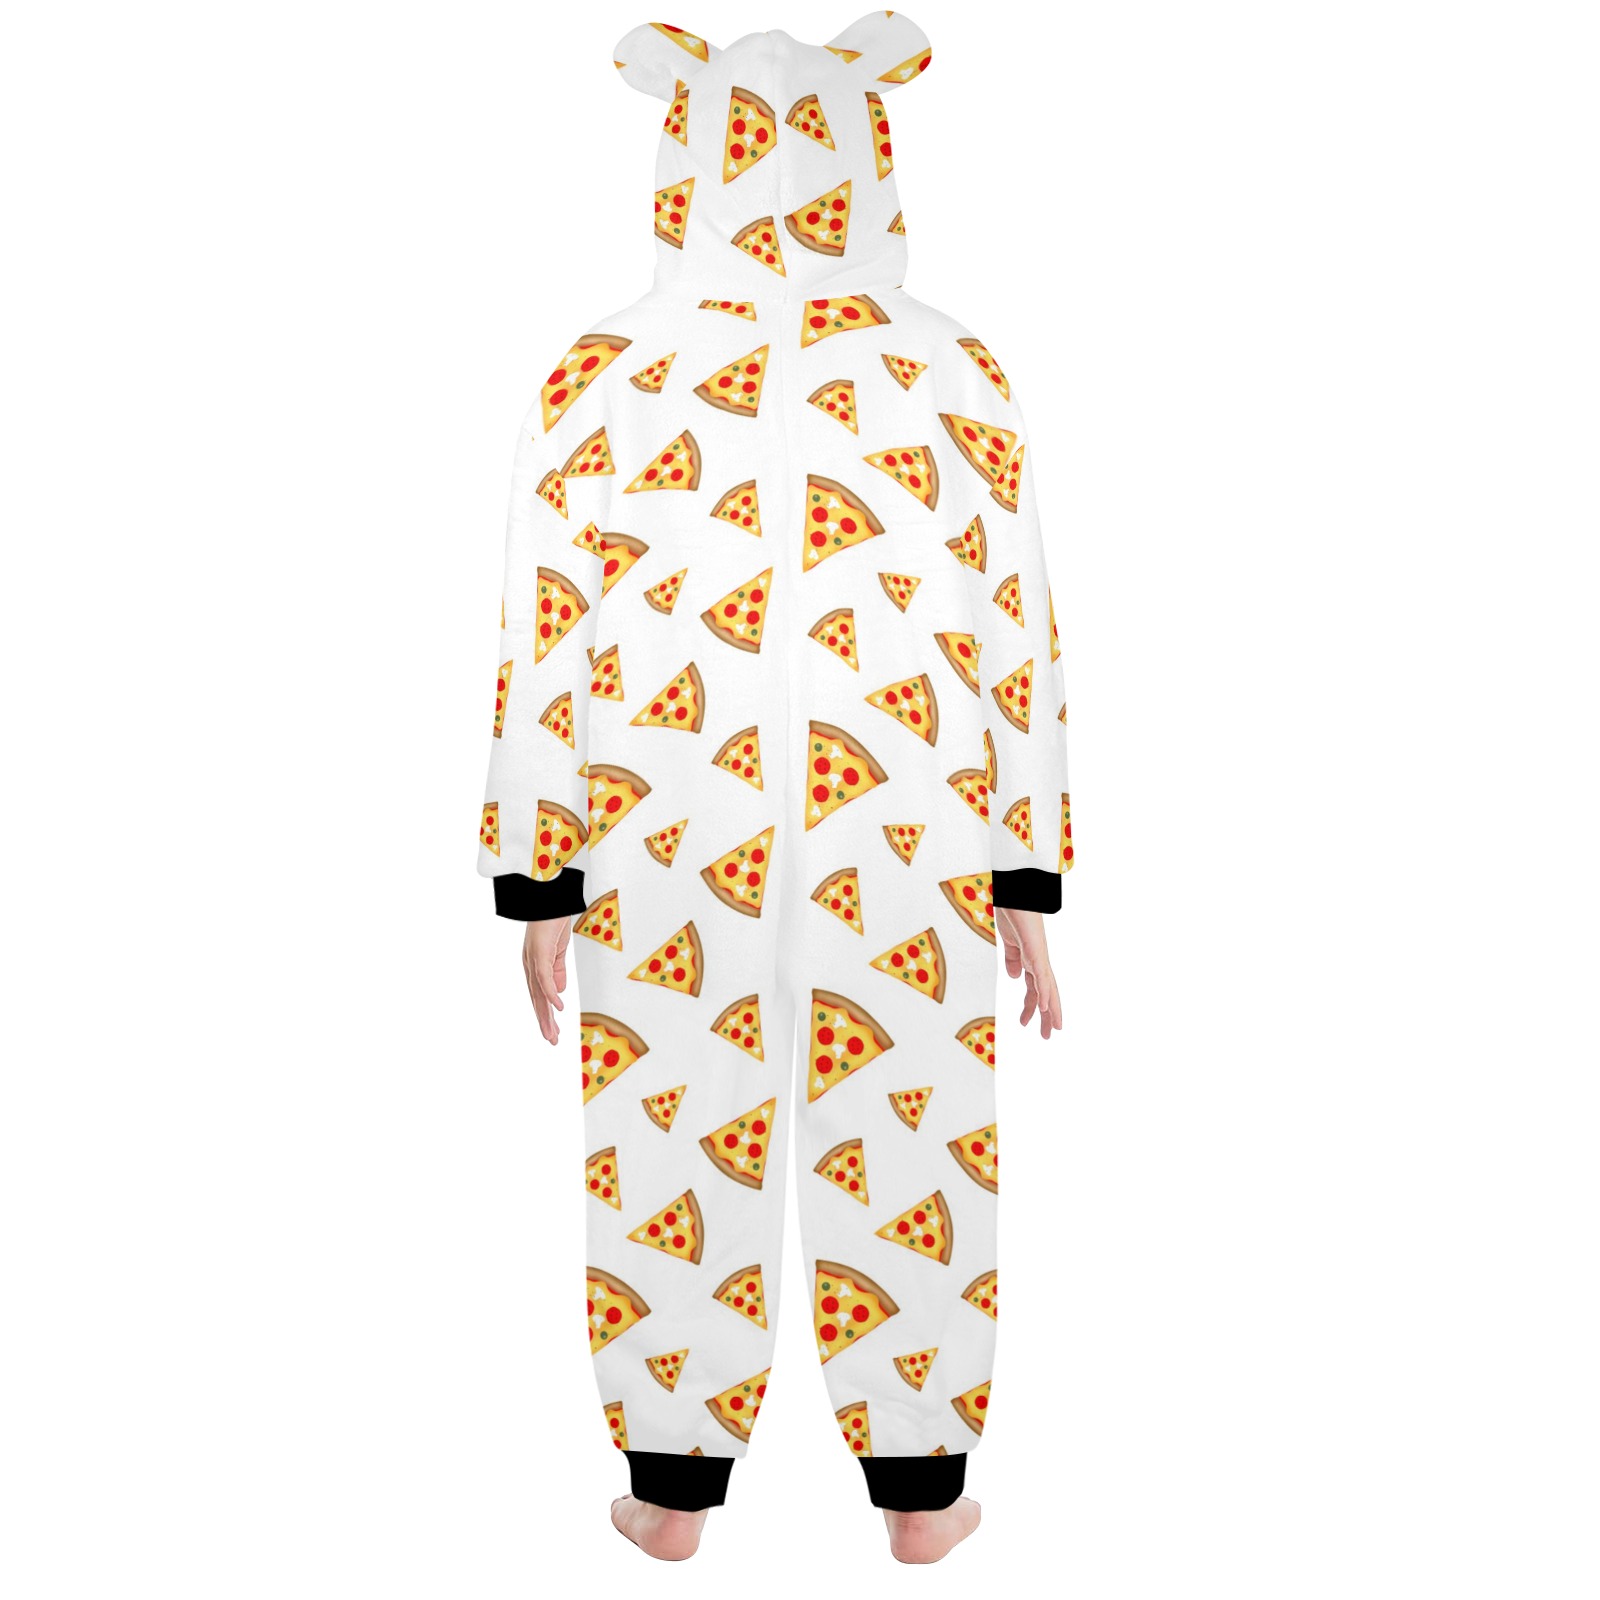 Cool and fun pizza slices pattern on white One-Piece Zip Up Hooded Pajamas for Big Kids